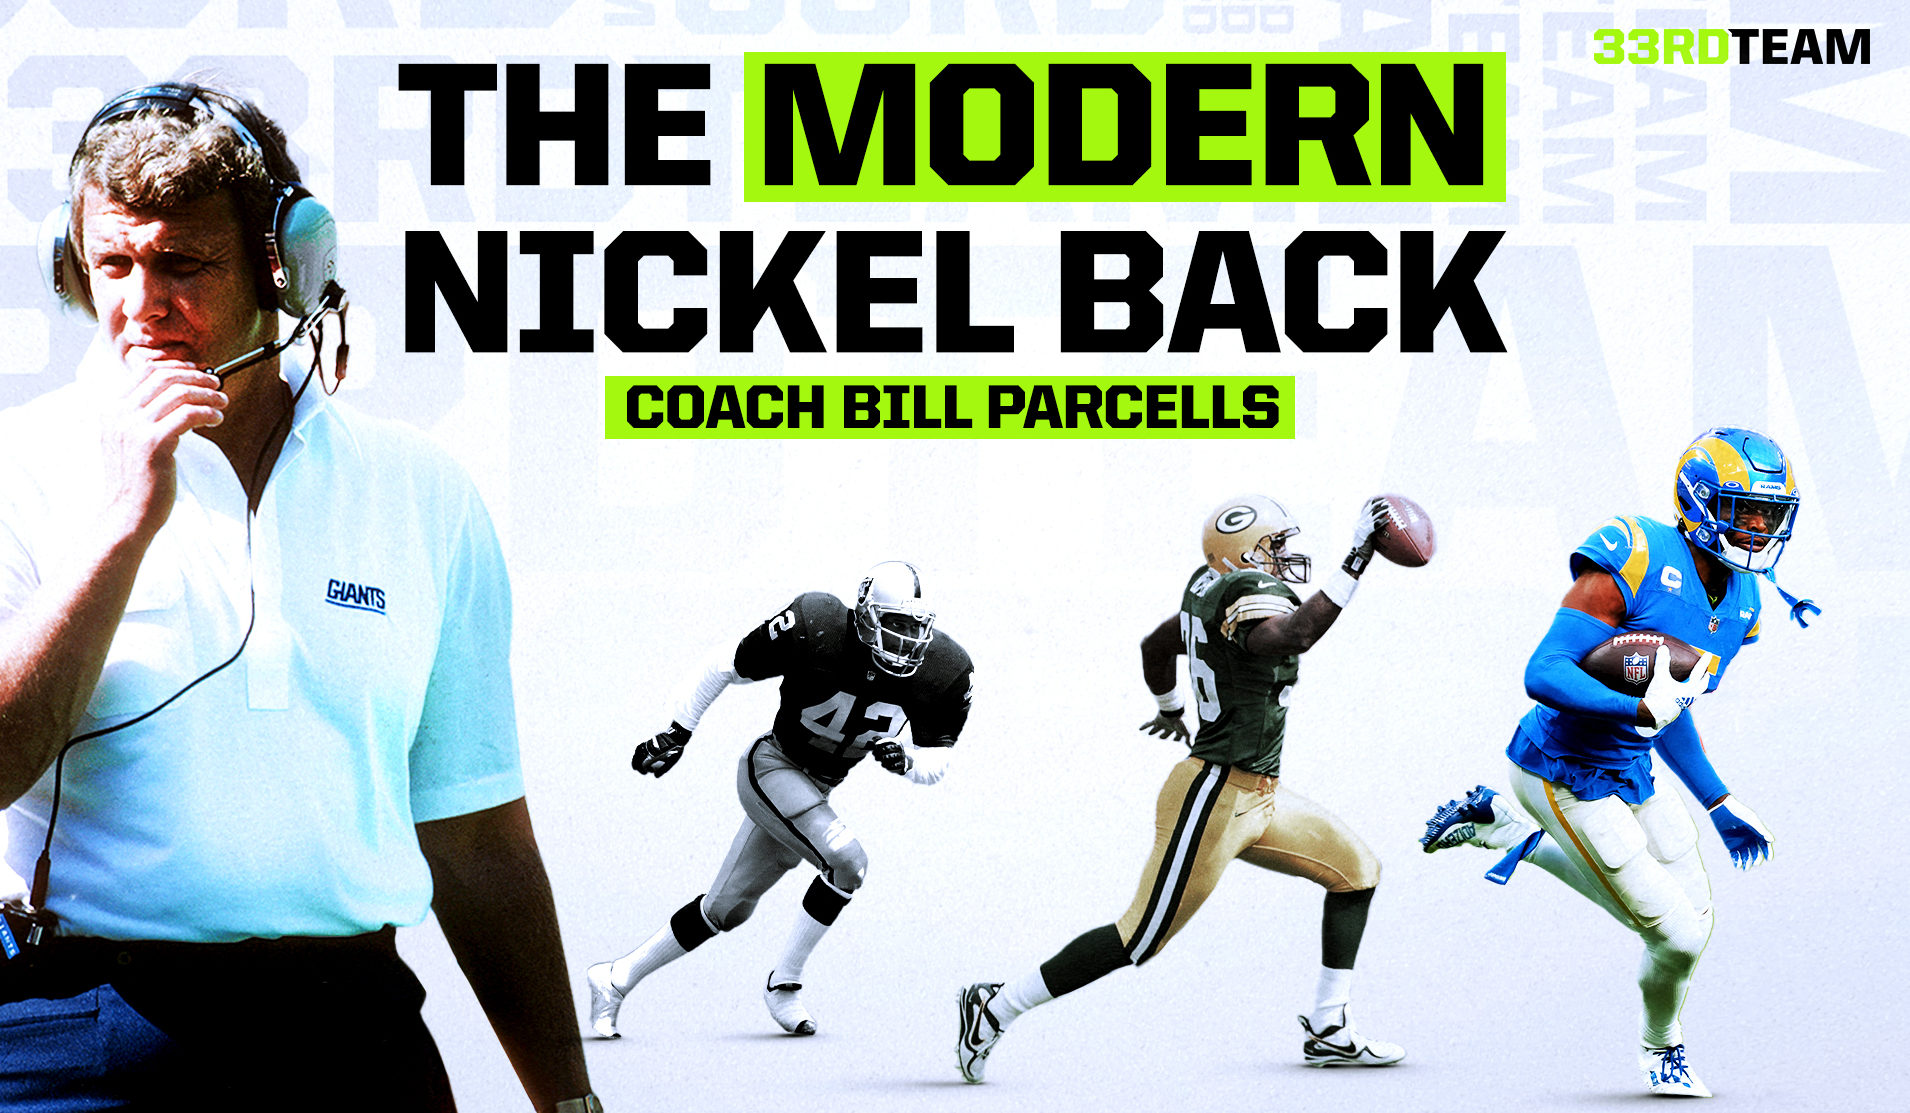 The ‘Modern Nickel Back’ is the Most Important Defensive Position